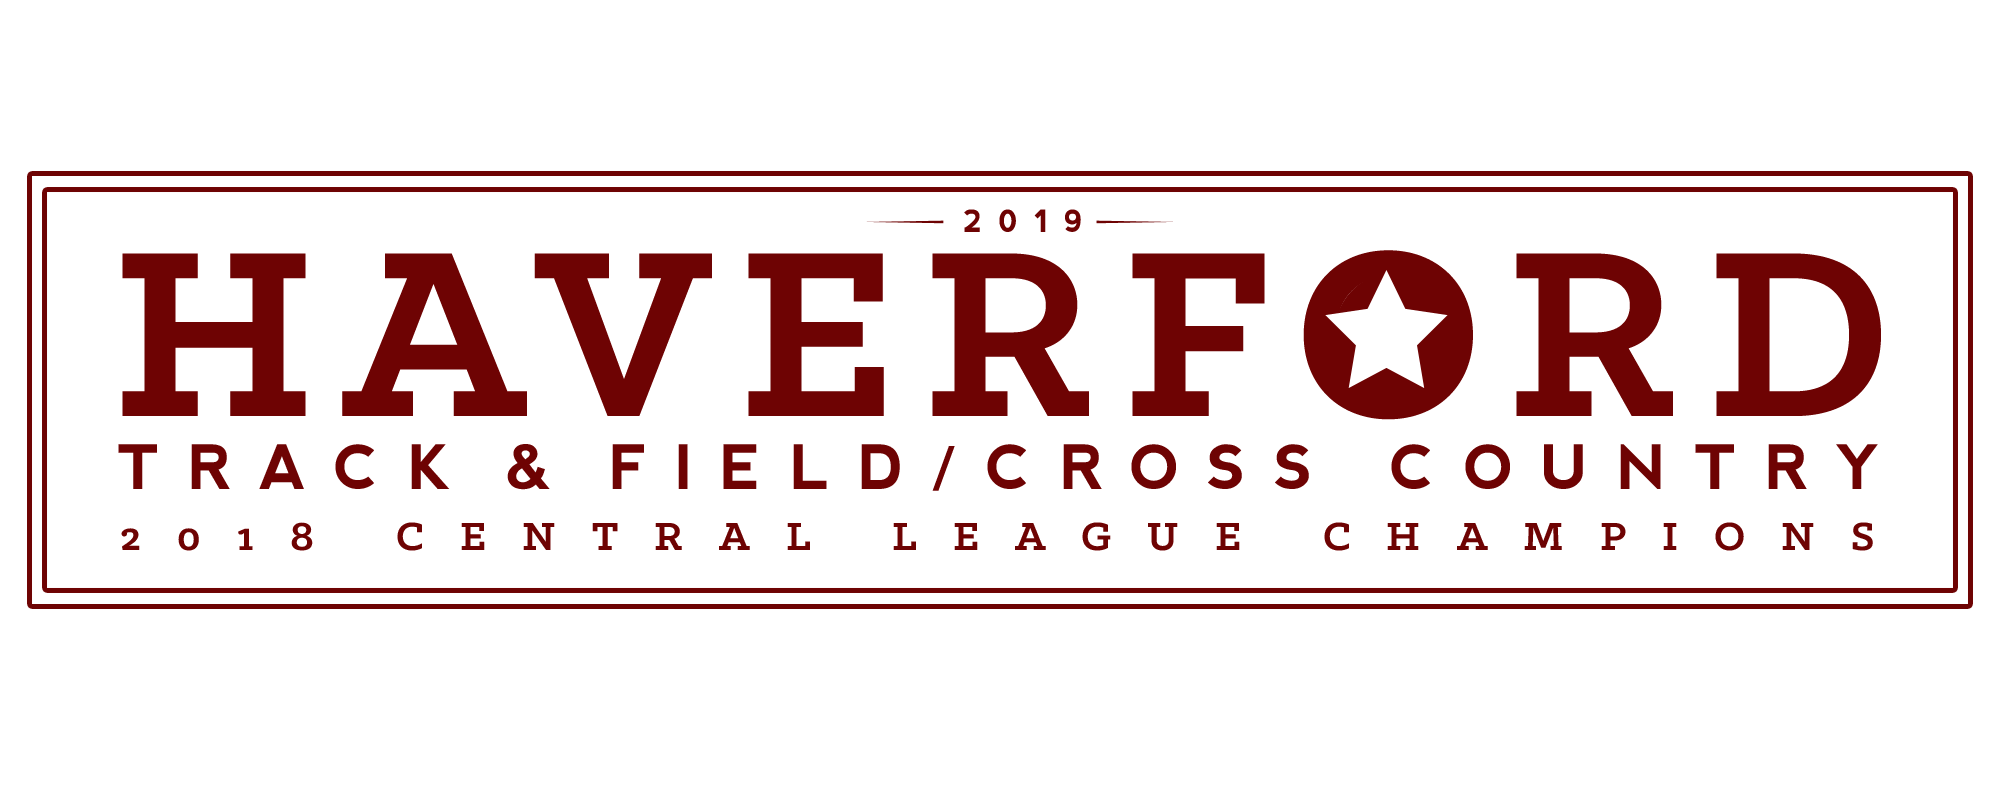 Haverford Logo - Haverford High School Cross Country and Track and Field